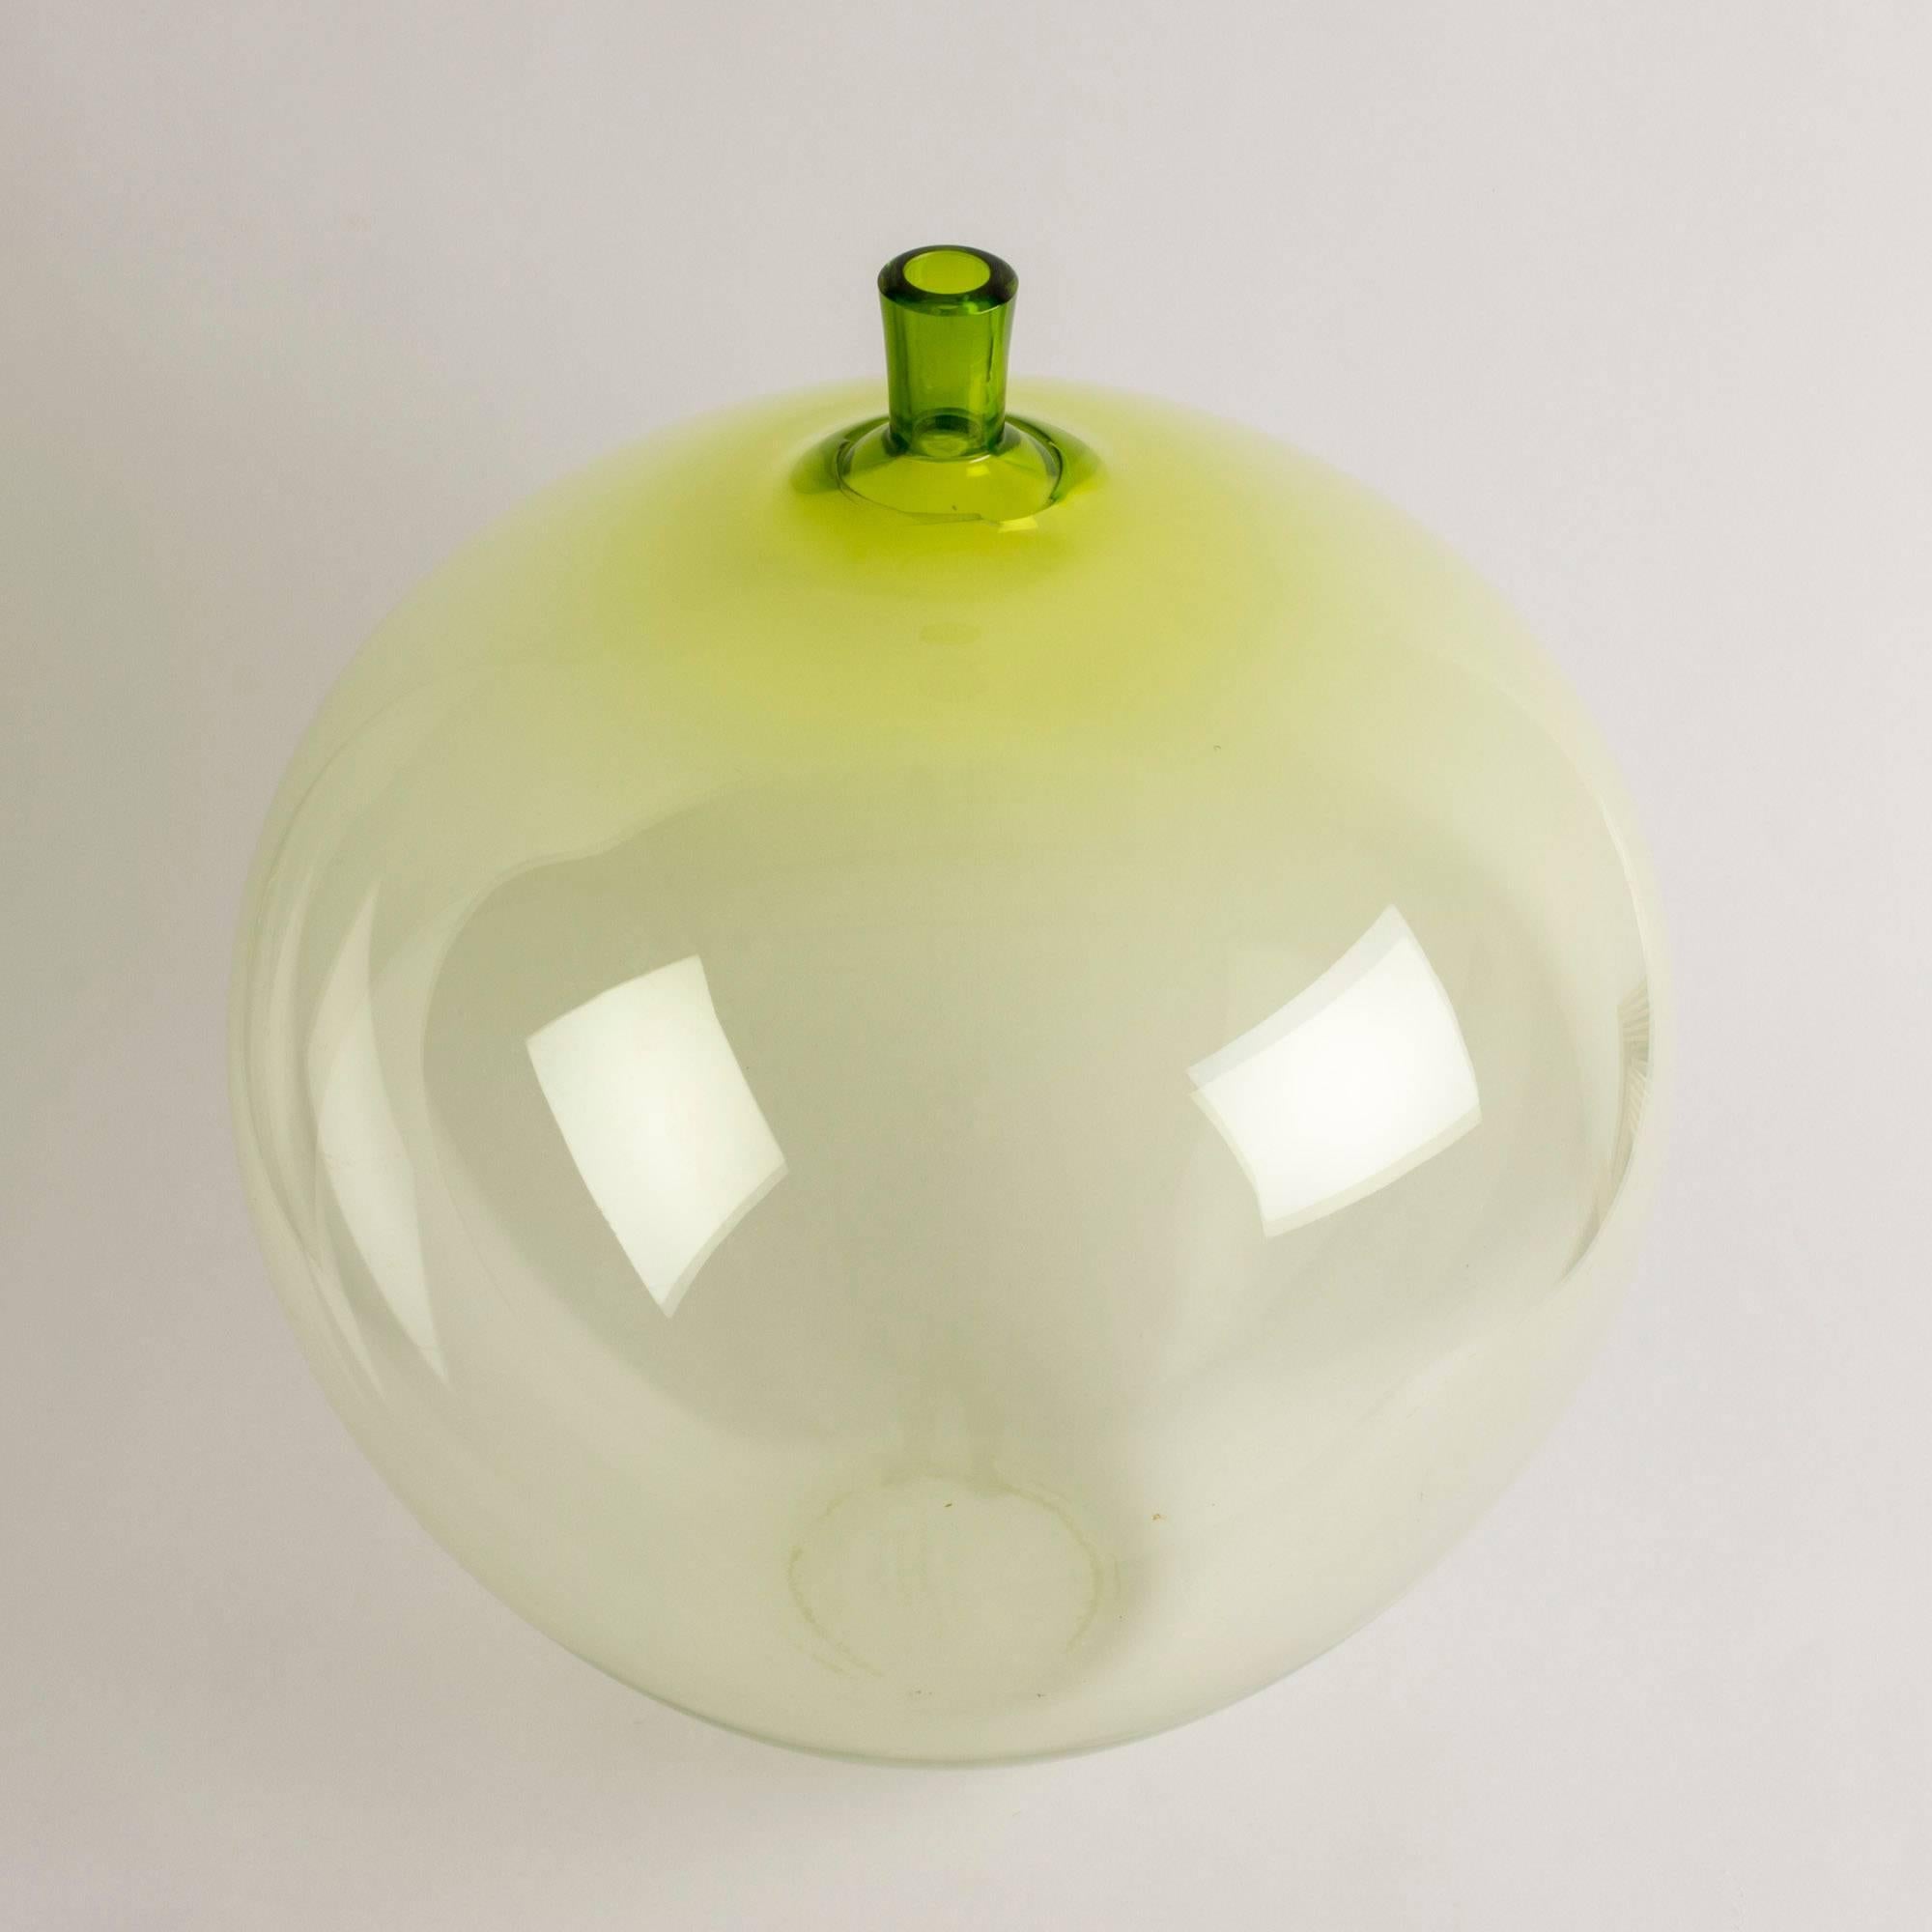 Stunning crystal glass apple by Ingeborg Lundin, tinted crispy green. The apple is an iconic piece, composed in 1955 and was first presented at the H55 fair in Helsingborg, Sweden, where it caused a sensation. The design is the epitome of Lundin’s